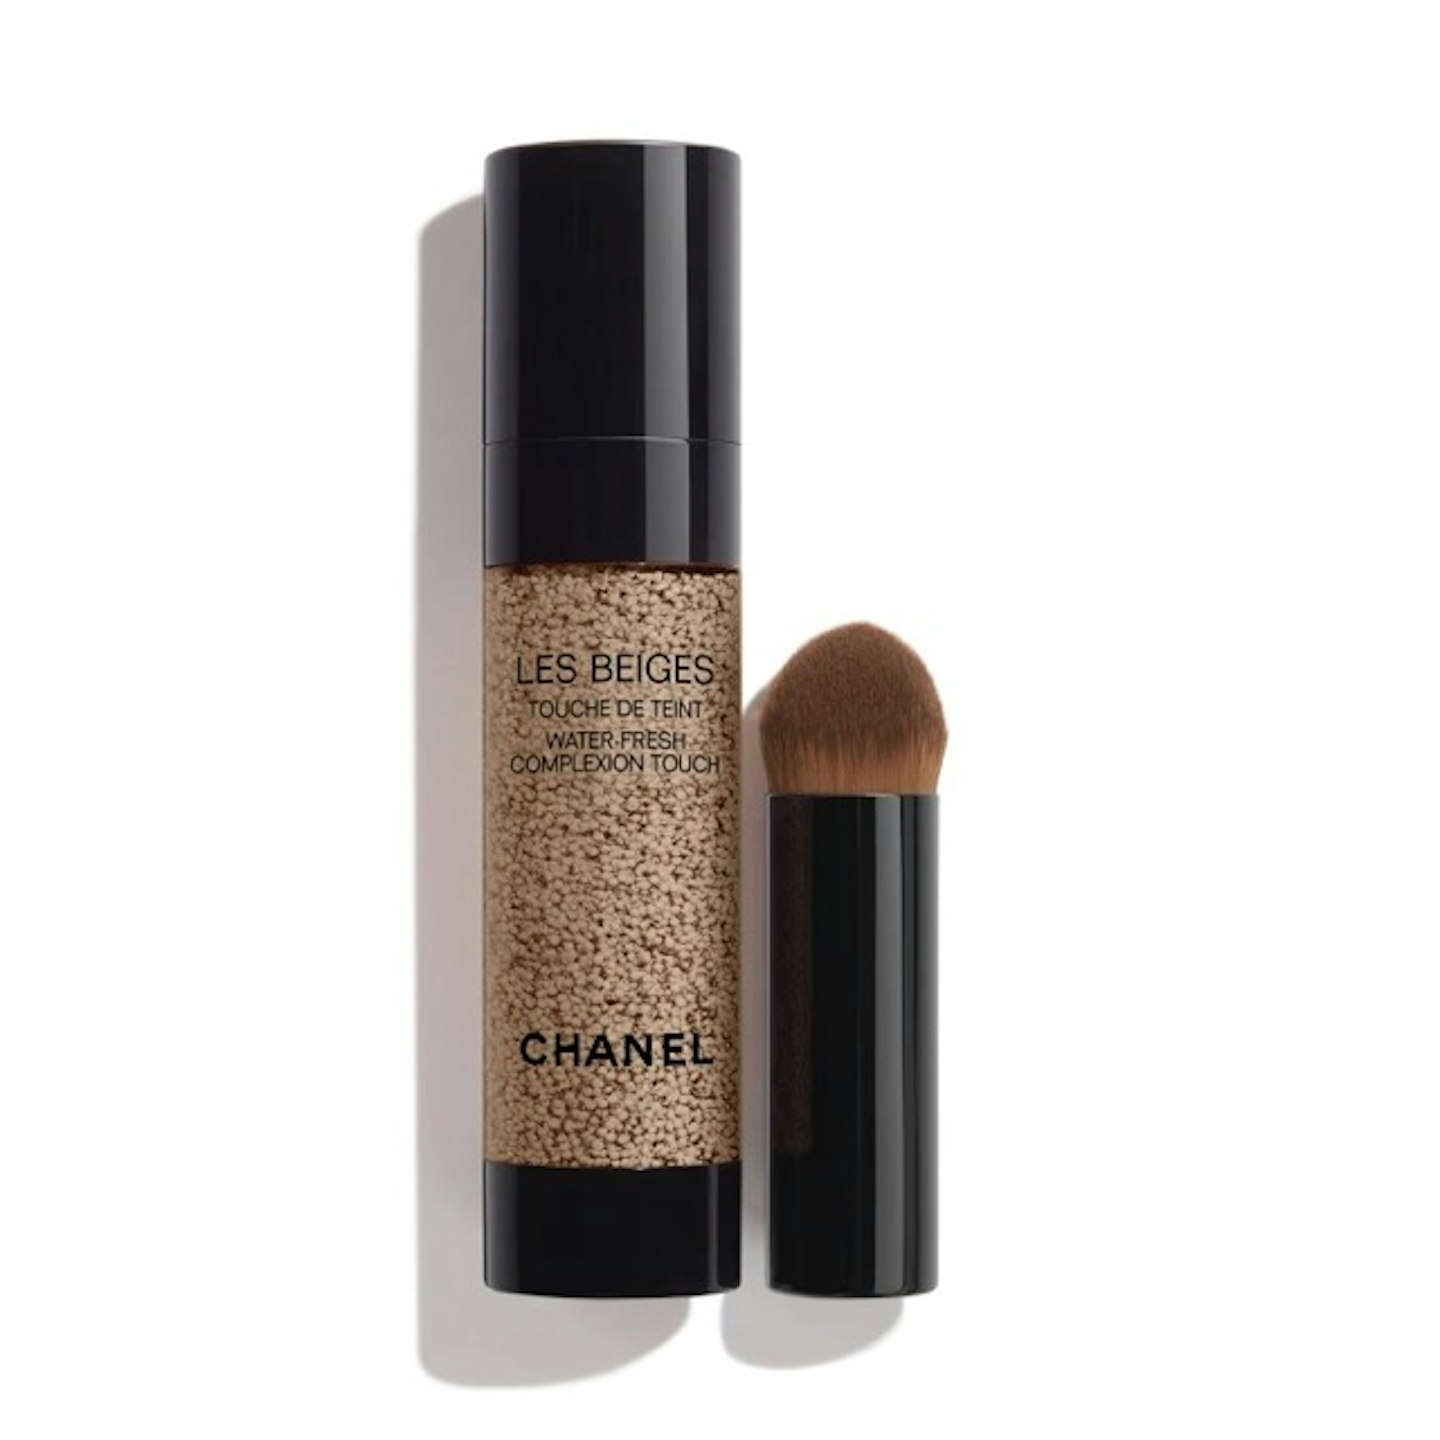 Chanel Les Beiges Water-Fresh Complexion Touch [with brush, below]